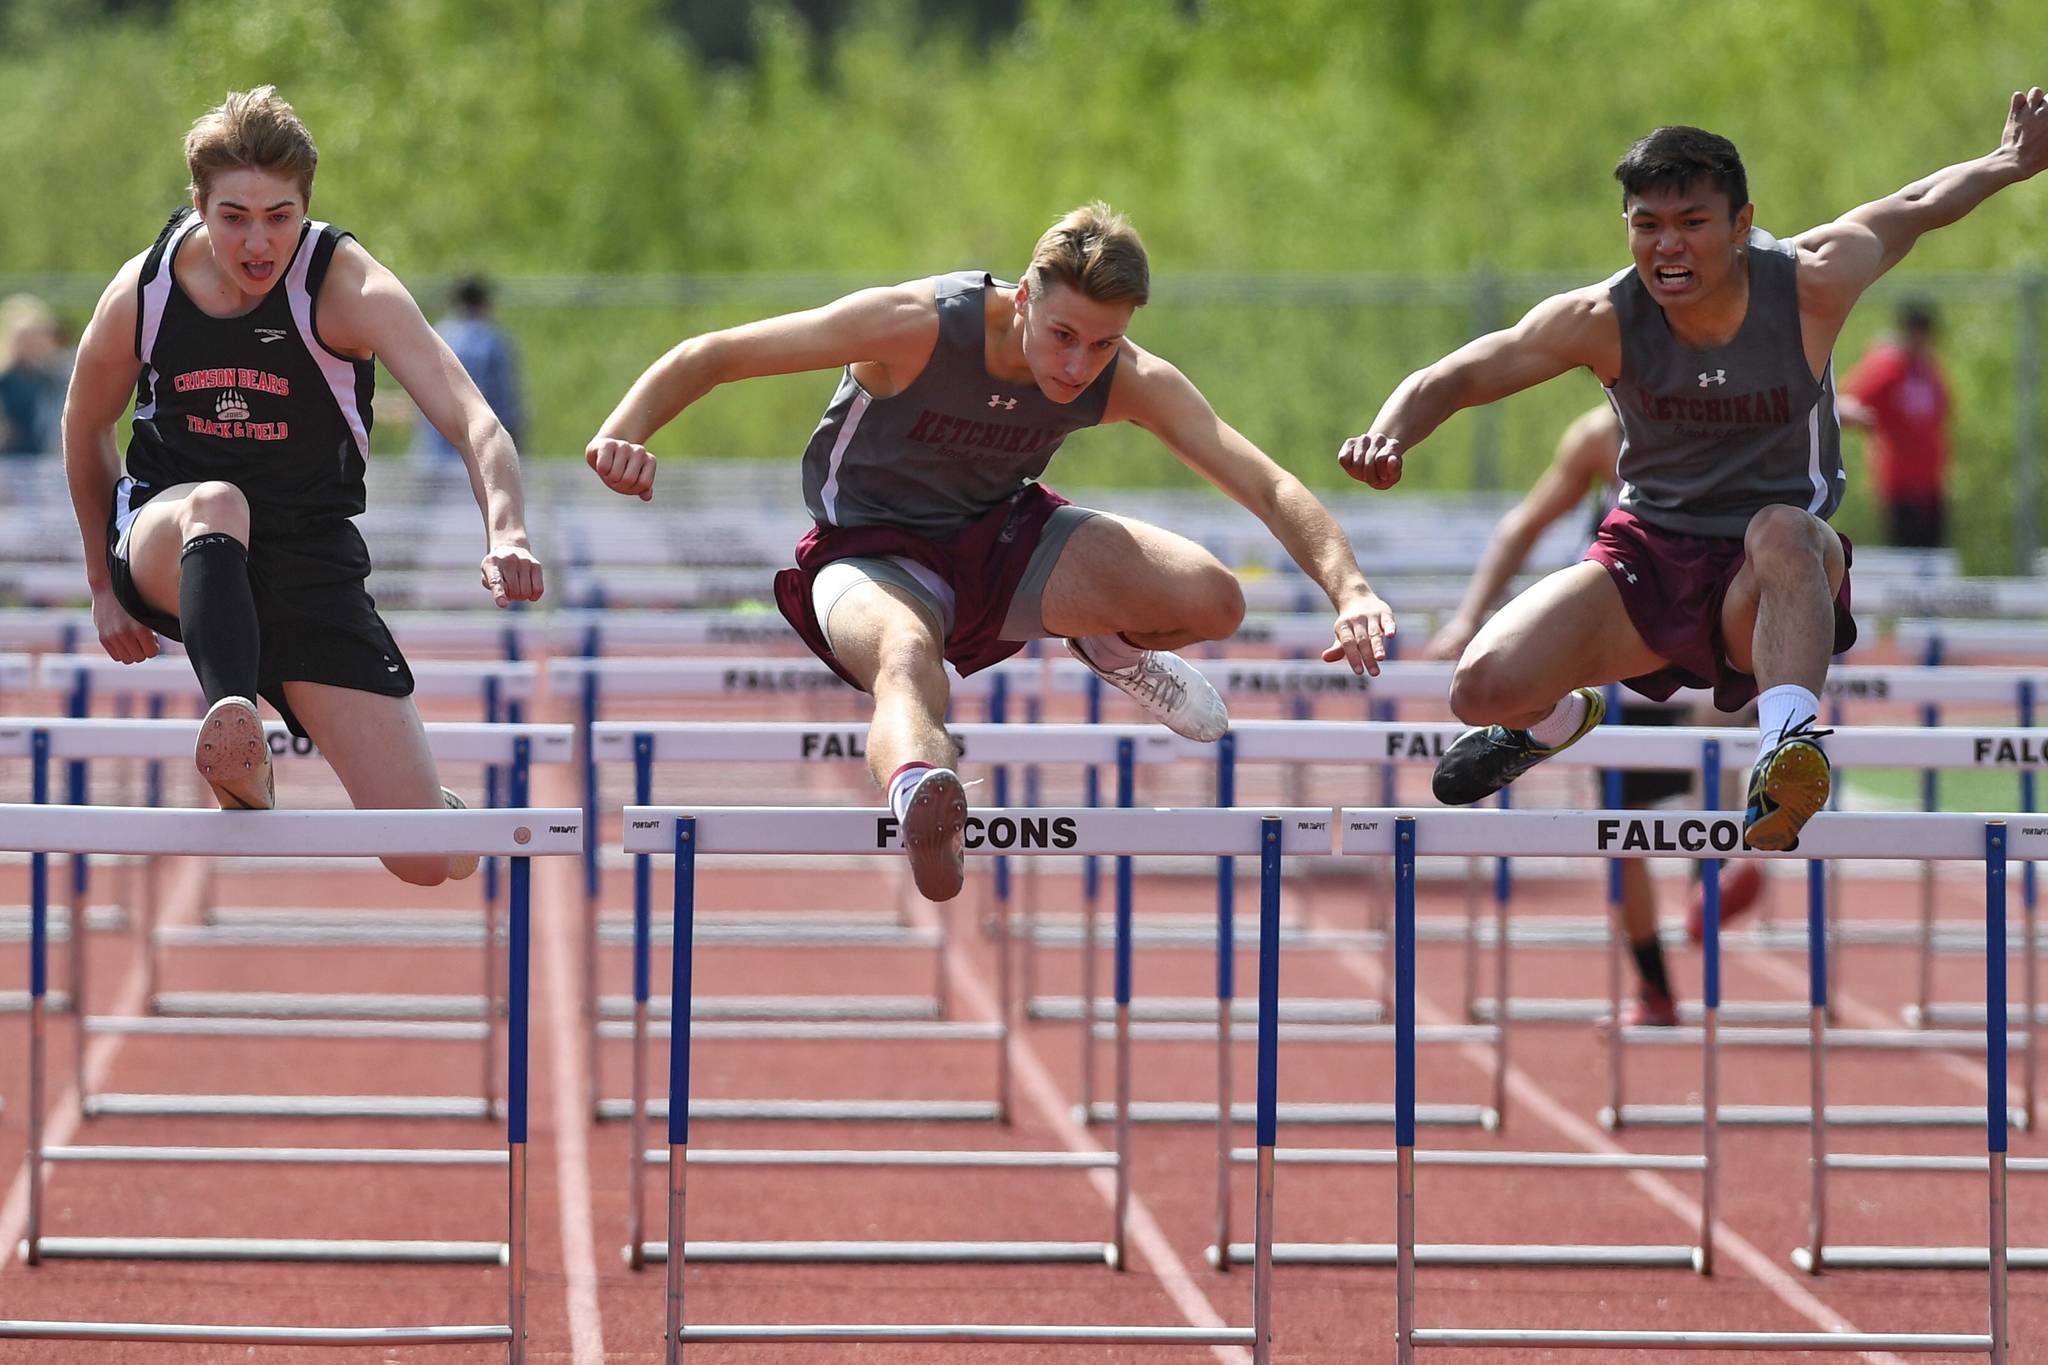 Ketchikan’s Ivers Credito, right, leads his teammate Christopher Carlson, center, and Juneau-Douglas’ Tyler Weldon in the boys-110 meter hurdles at the Region V Track and Field Championships at Thunder Mountain High School on Saturday, May 18, 2019. (Michael Penn | Juneau Empire)